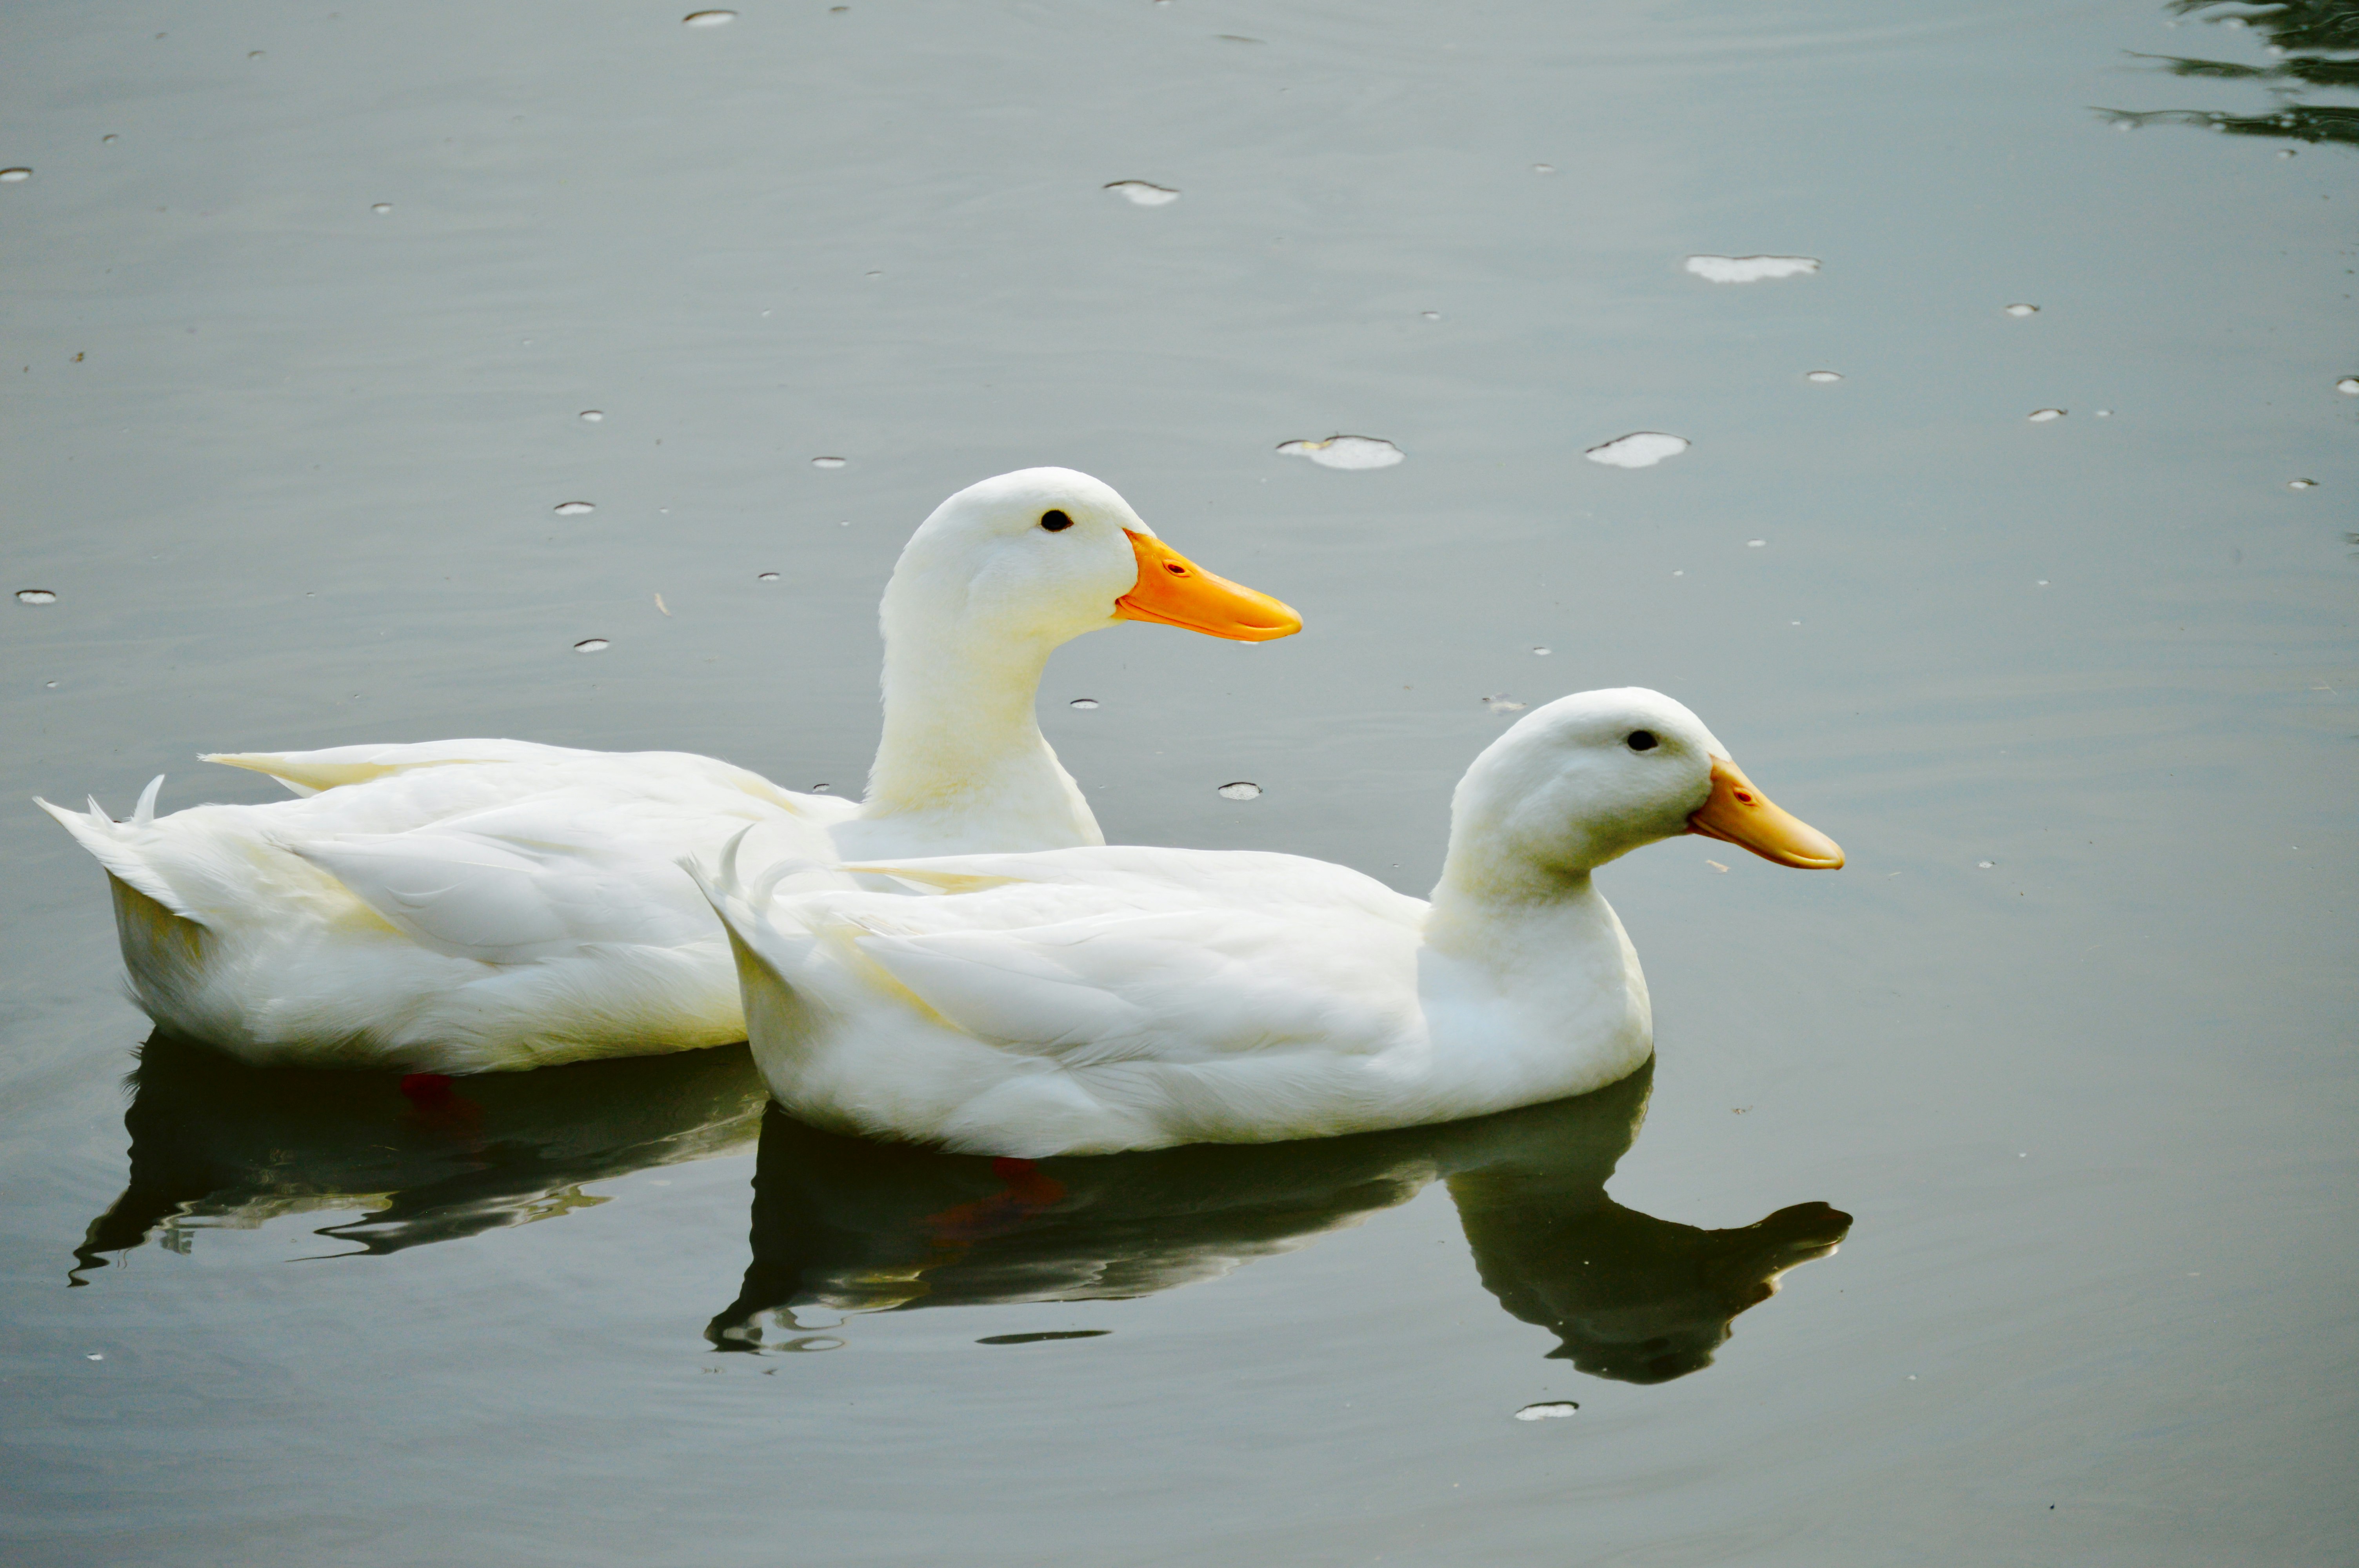 white duck on water during daytime